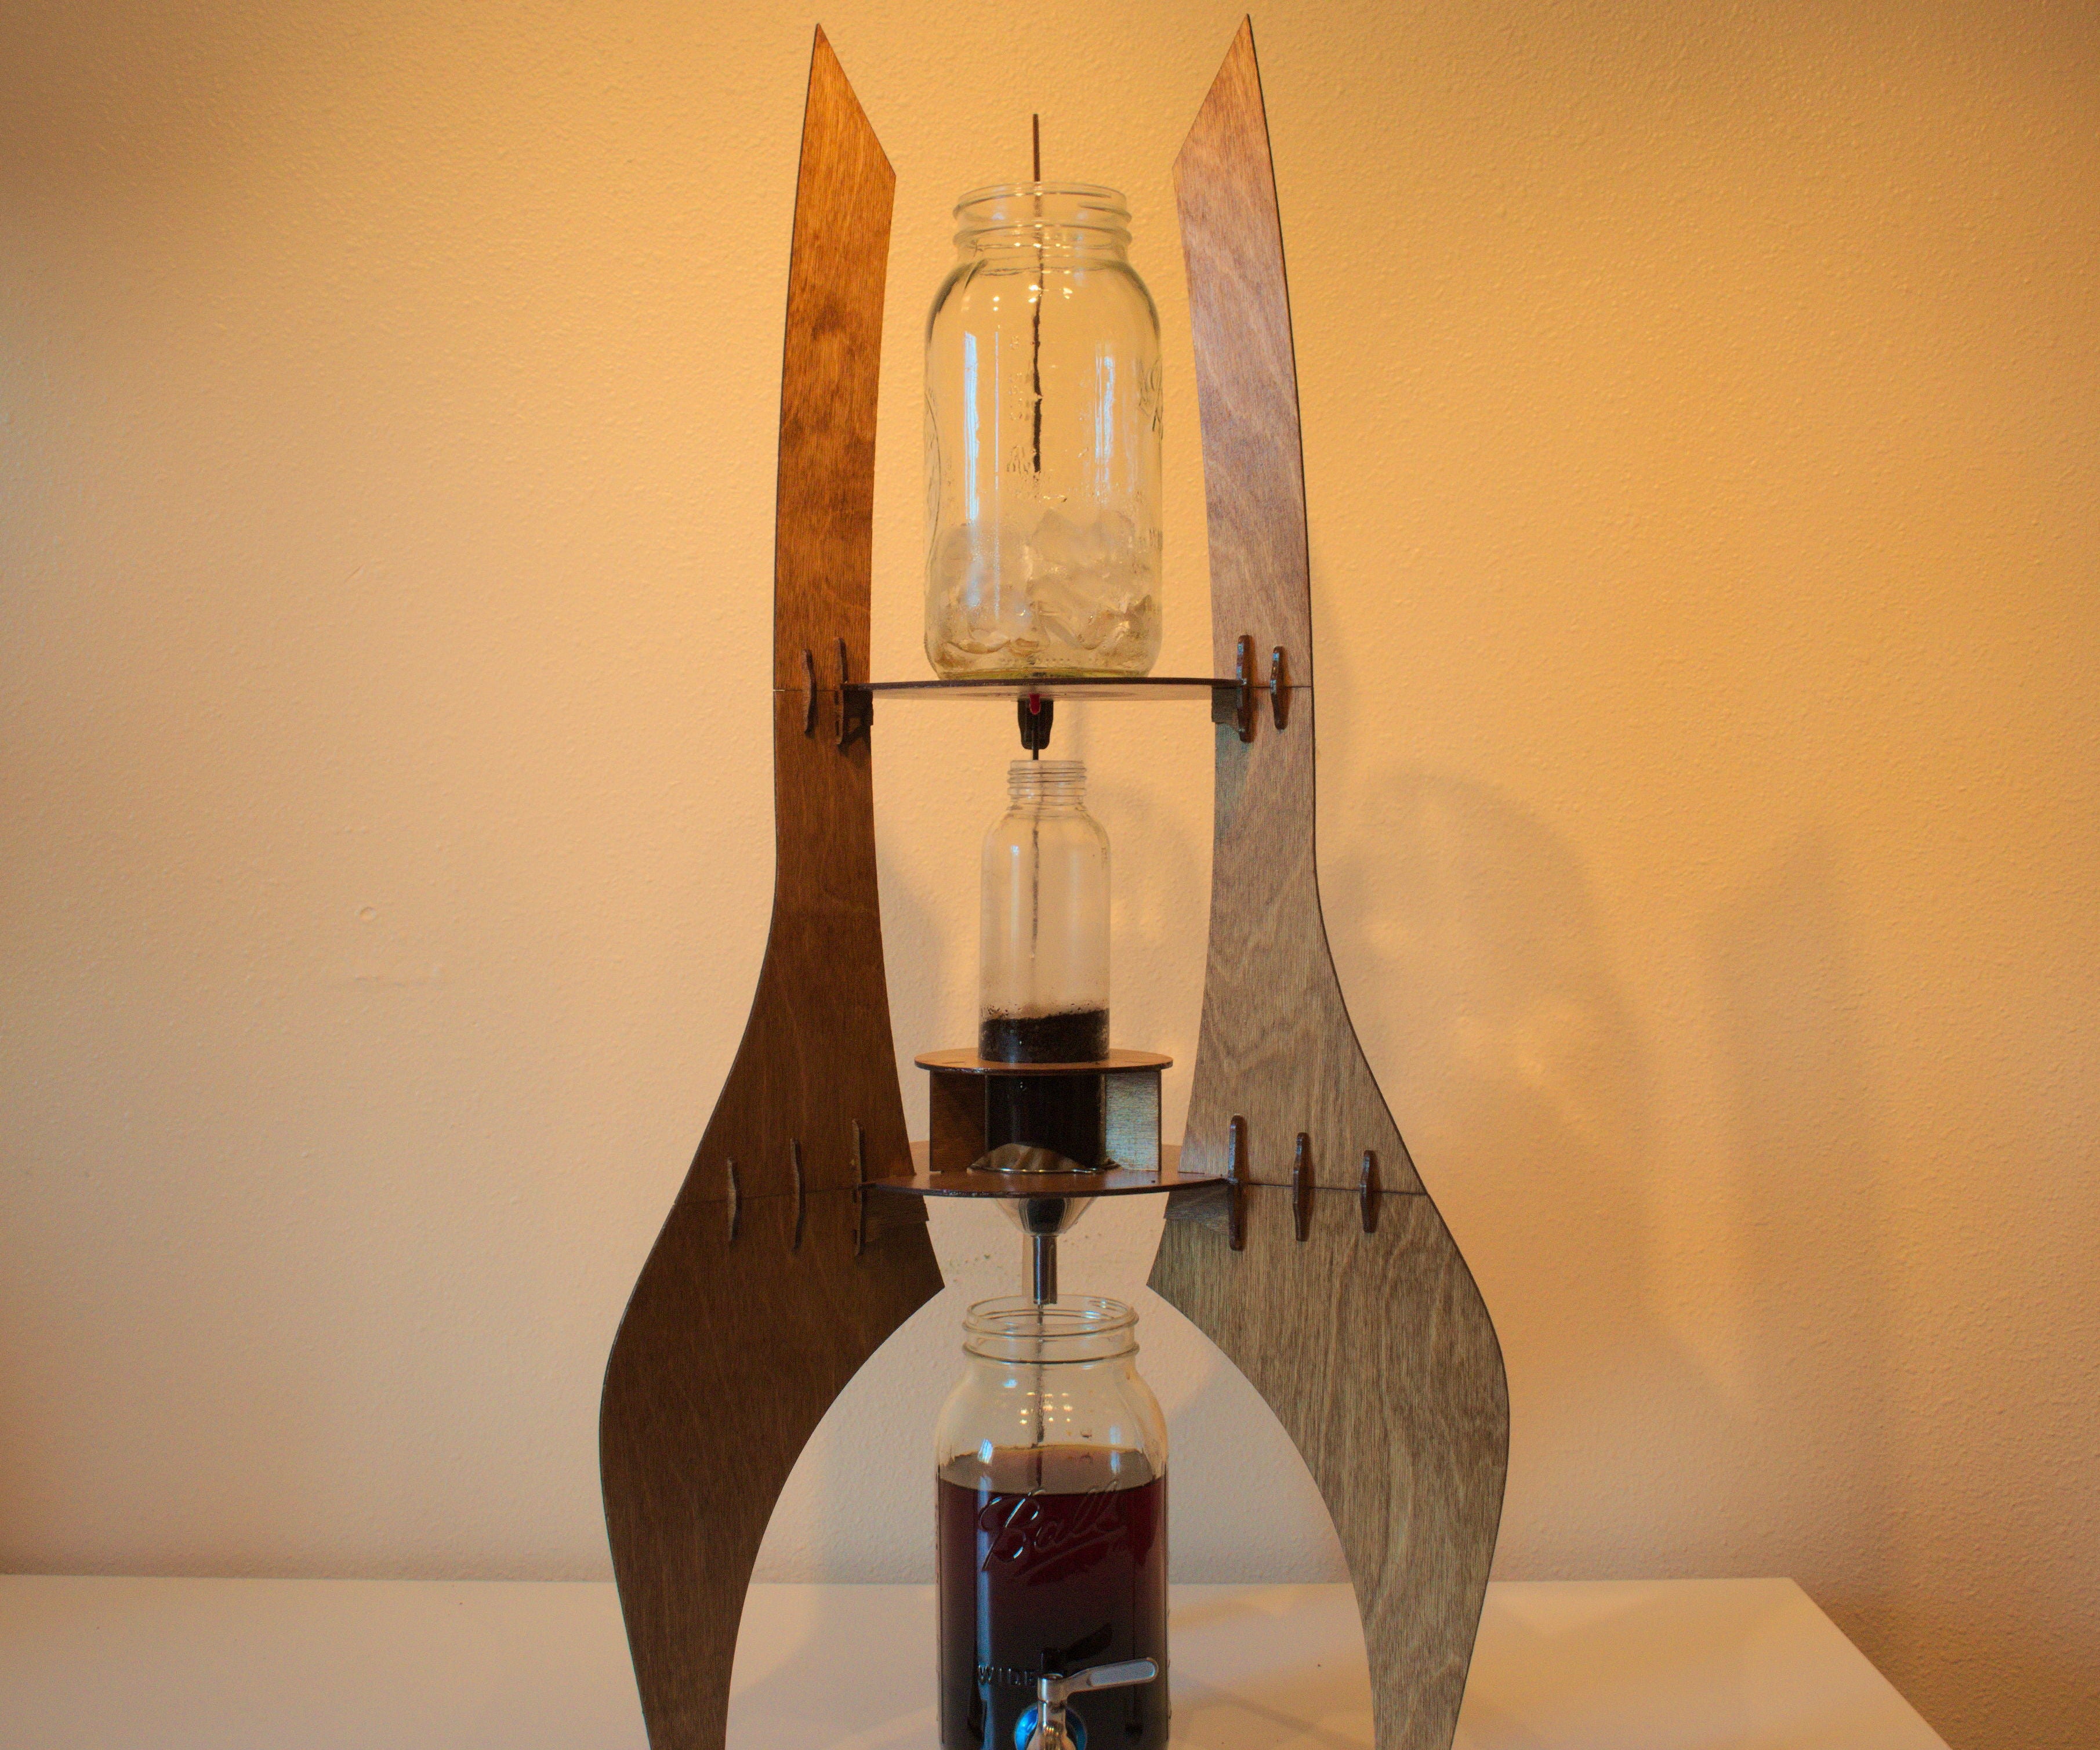 Spaceship Themed Cold Drip Coffee Tower